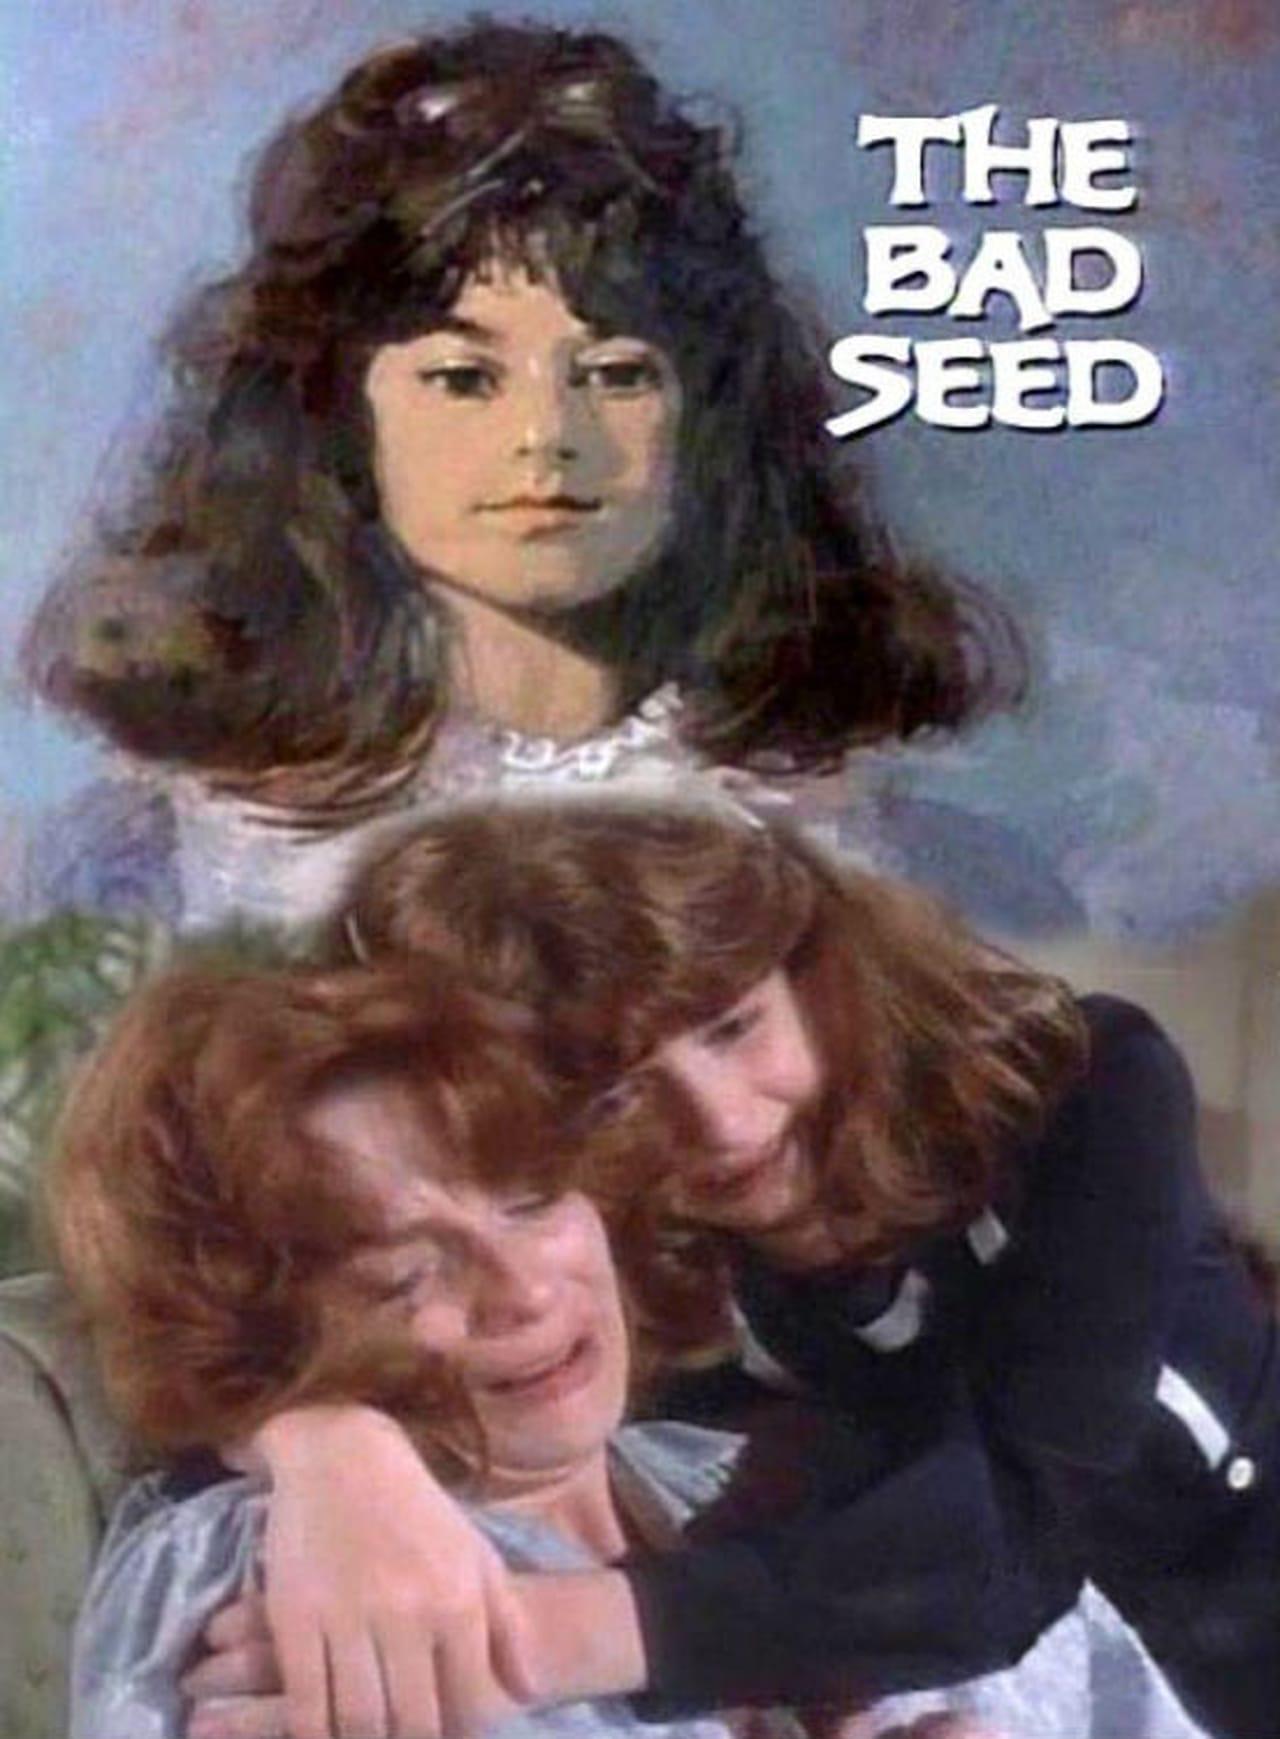 The Bad Seed poster